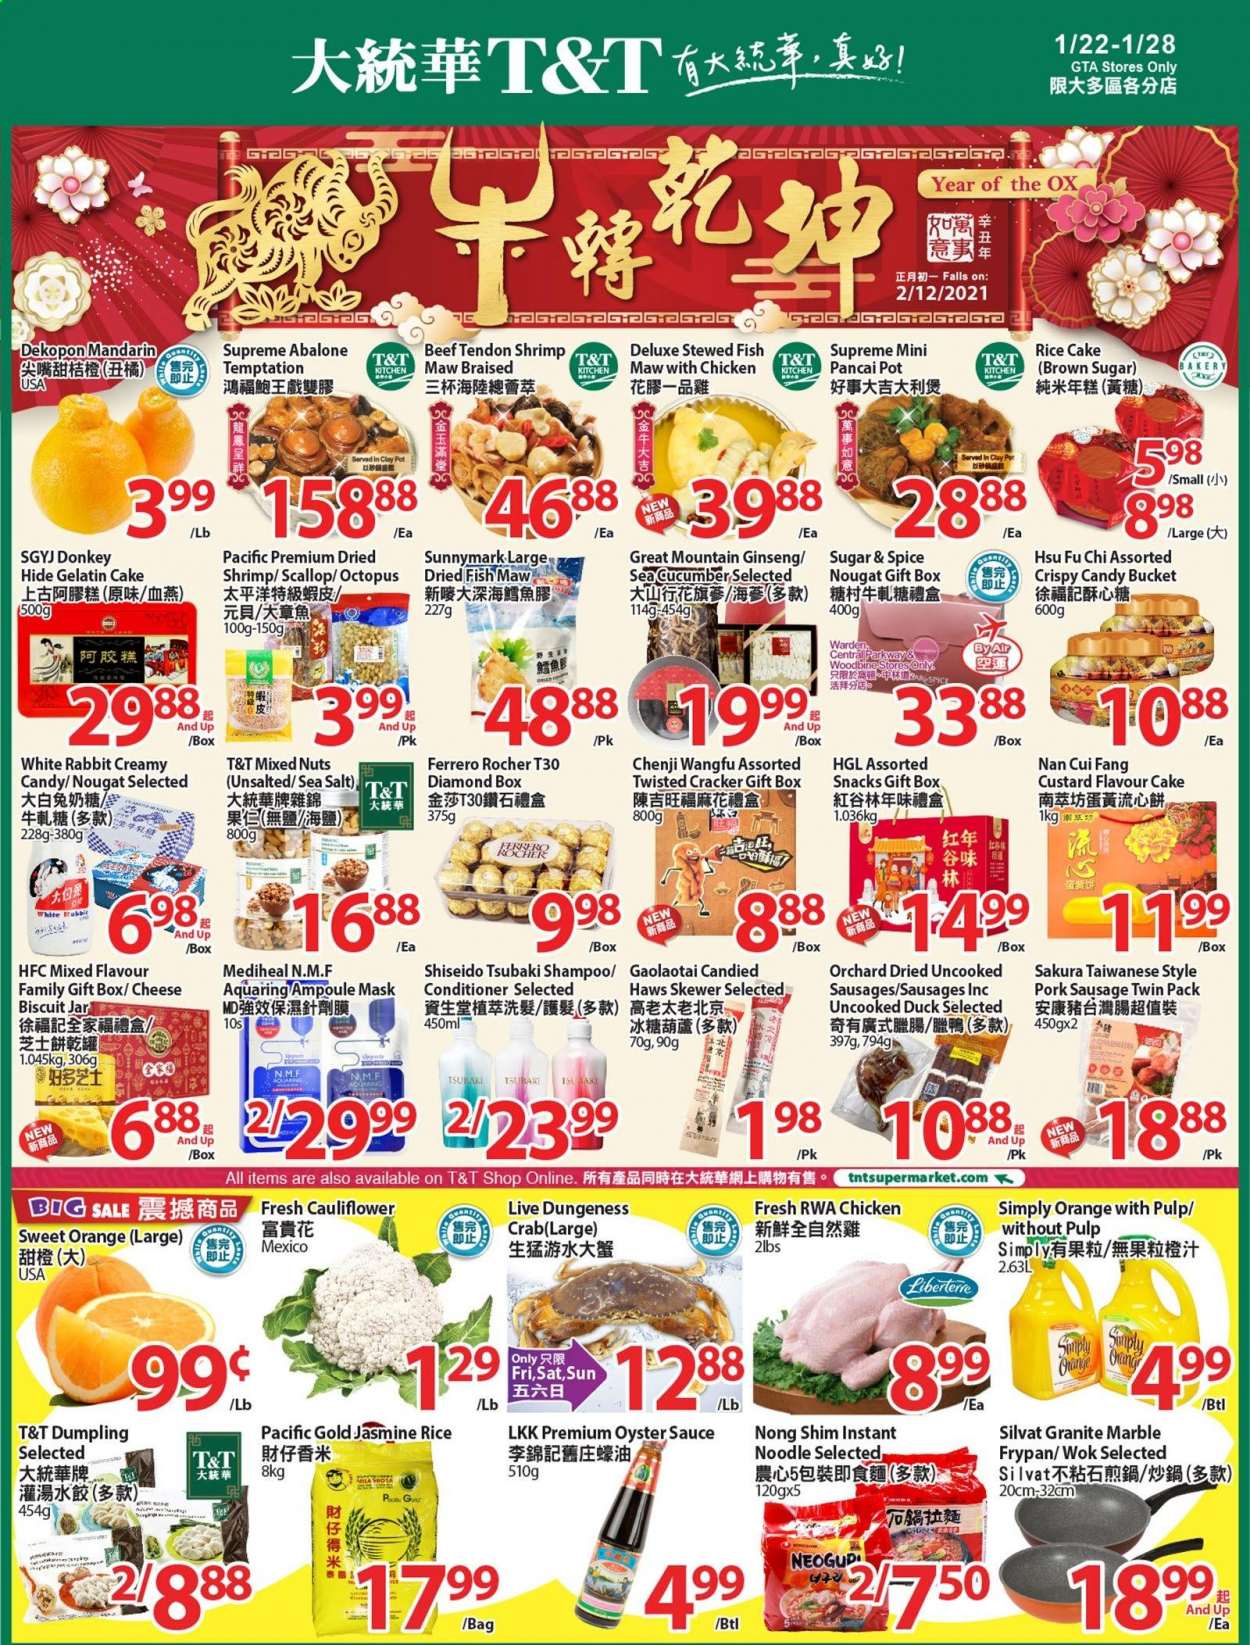 thumbnail - T&T Supermarket Flyer - January 22, 2021 - January 28, 2021 - Sales products - cauliflower, mandarines, octopus, oysters, crab, shrimps, abalone, sauce, dumplings, noodles, sausage, pork sausage, cheese, custard, rabbit, snack, crackers, biscuit, cane sugar, jasmine rice, spice, oyster sauce, mixed nuts, Shiseido, conditioner, bag, pot, wok, frying pan, jar, pin, gift box, ginseng, gelatin, shampoo, nougat. Page 1.